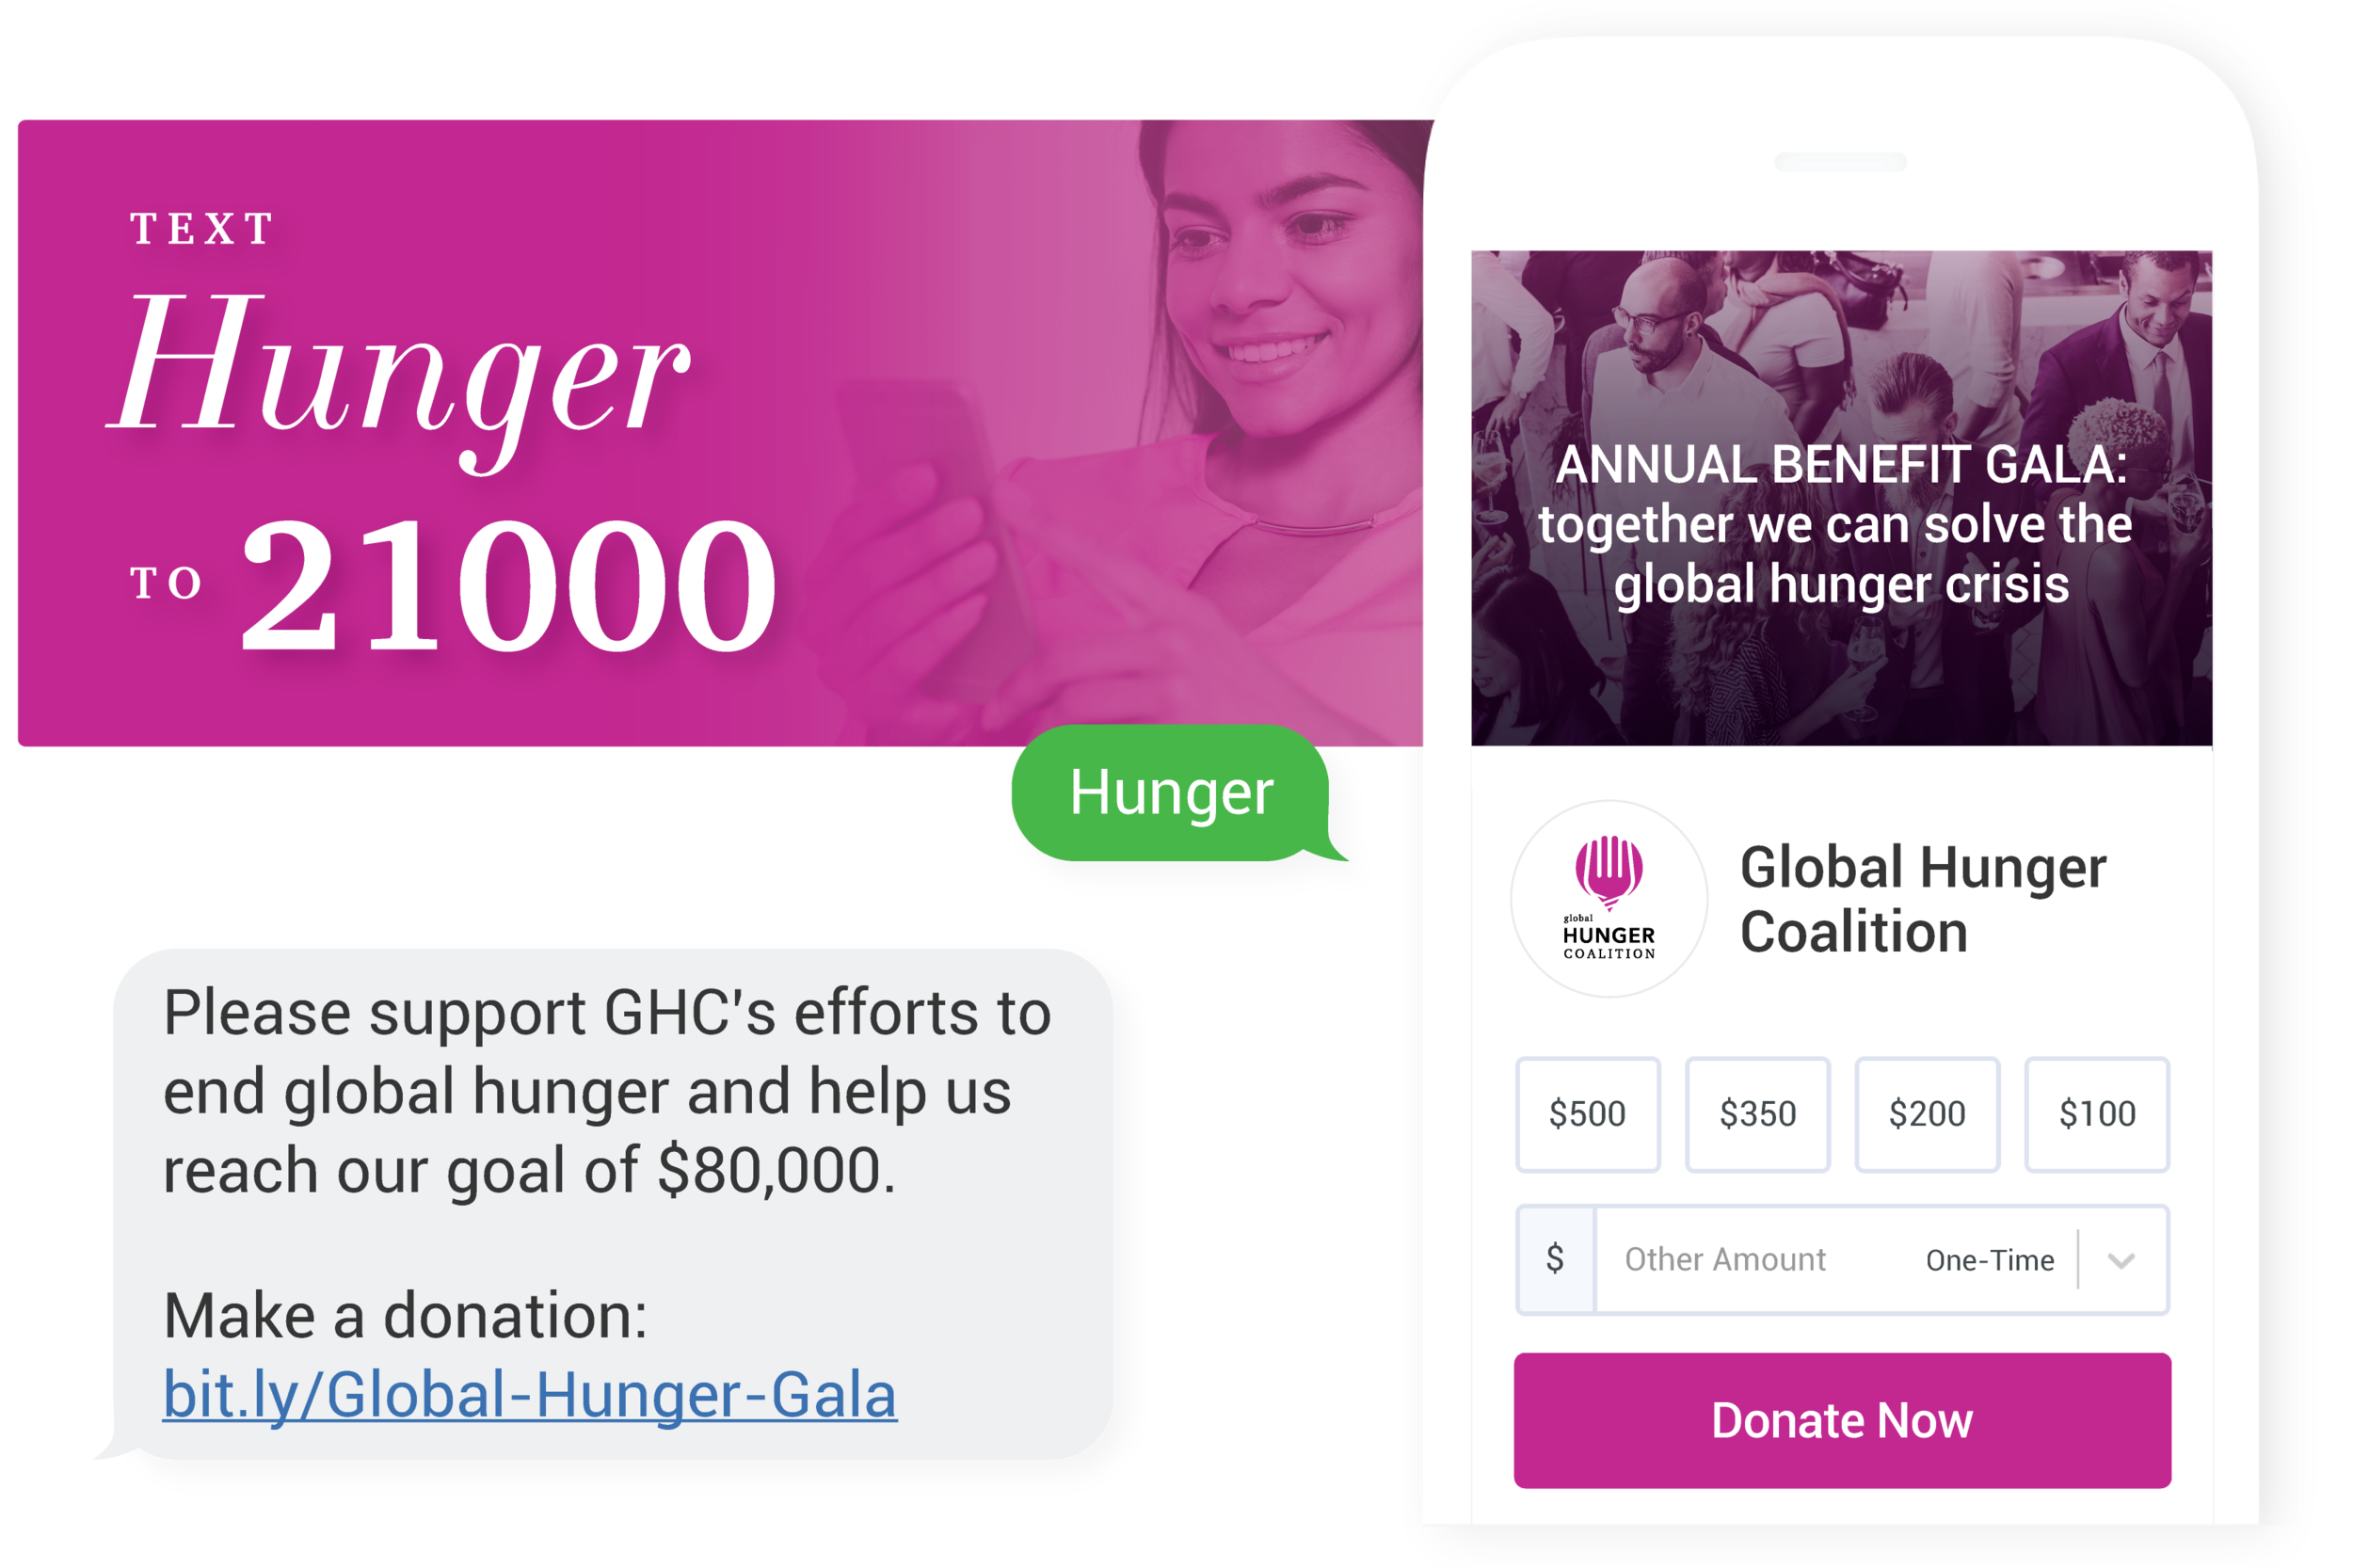 Collect text donations - Forget about check gathering and manual record keeping at events. Easily convert supporters into givers with a Text-to-Give ask. Tailor the message and URL for each event.